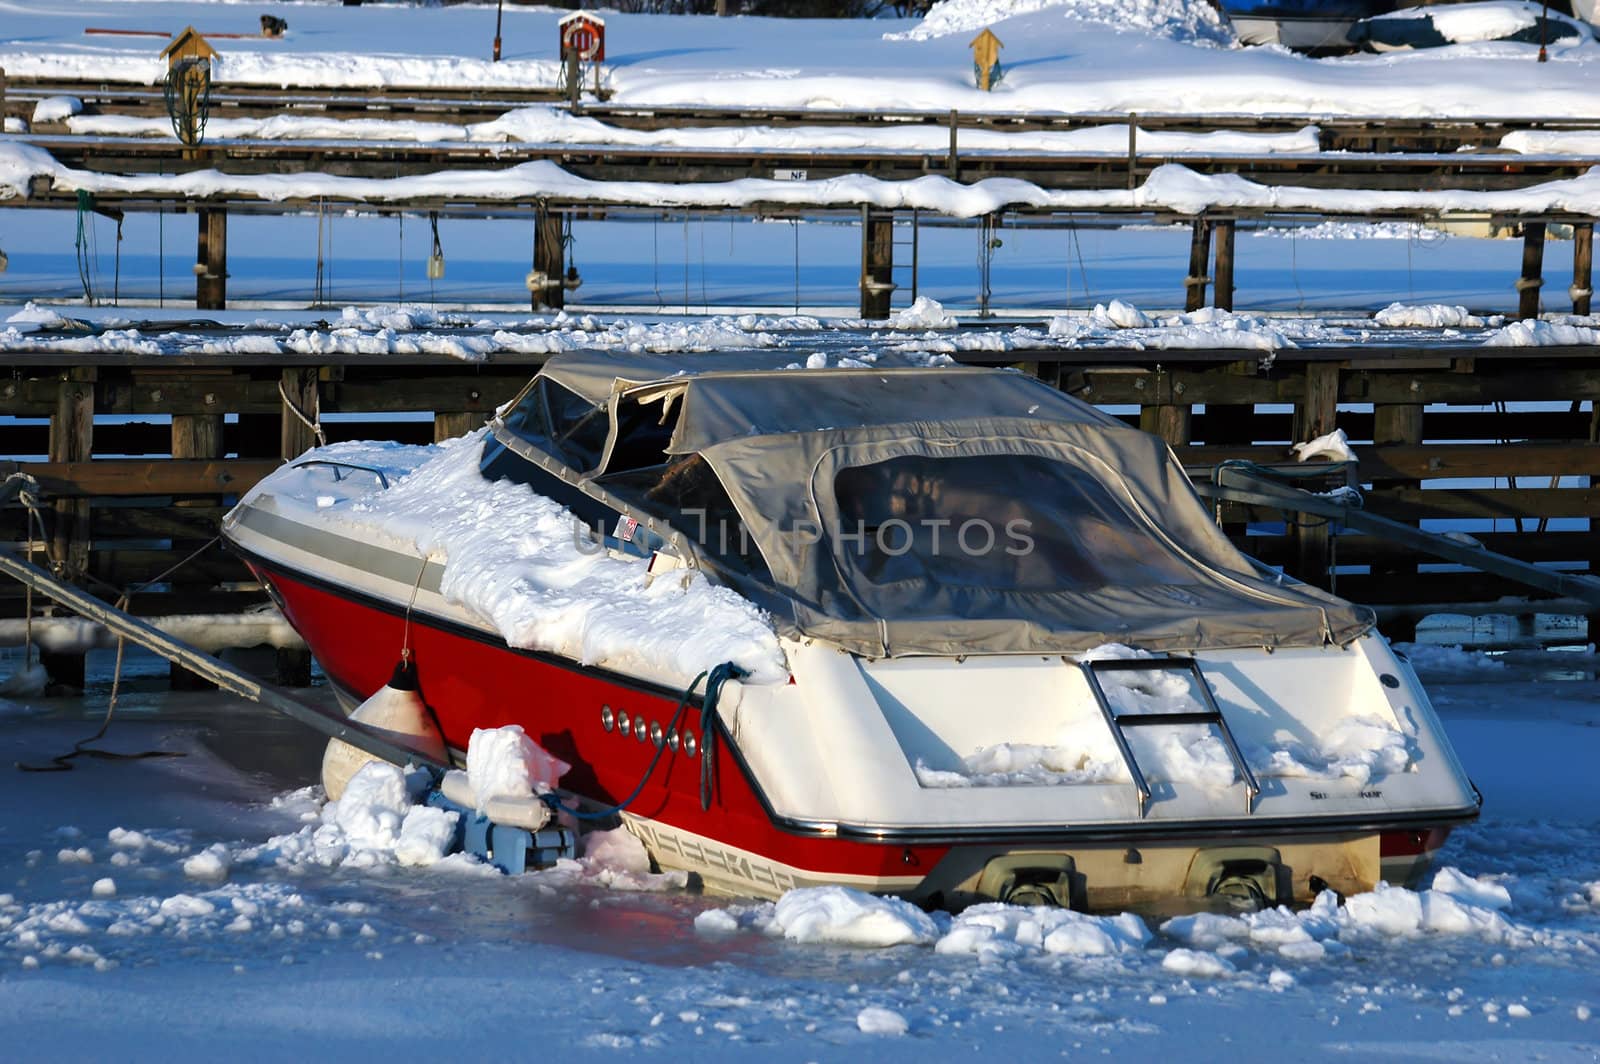 Boat in ice.
This is not good. 
From a winterday in Larvik, Norway.